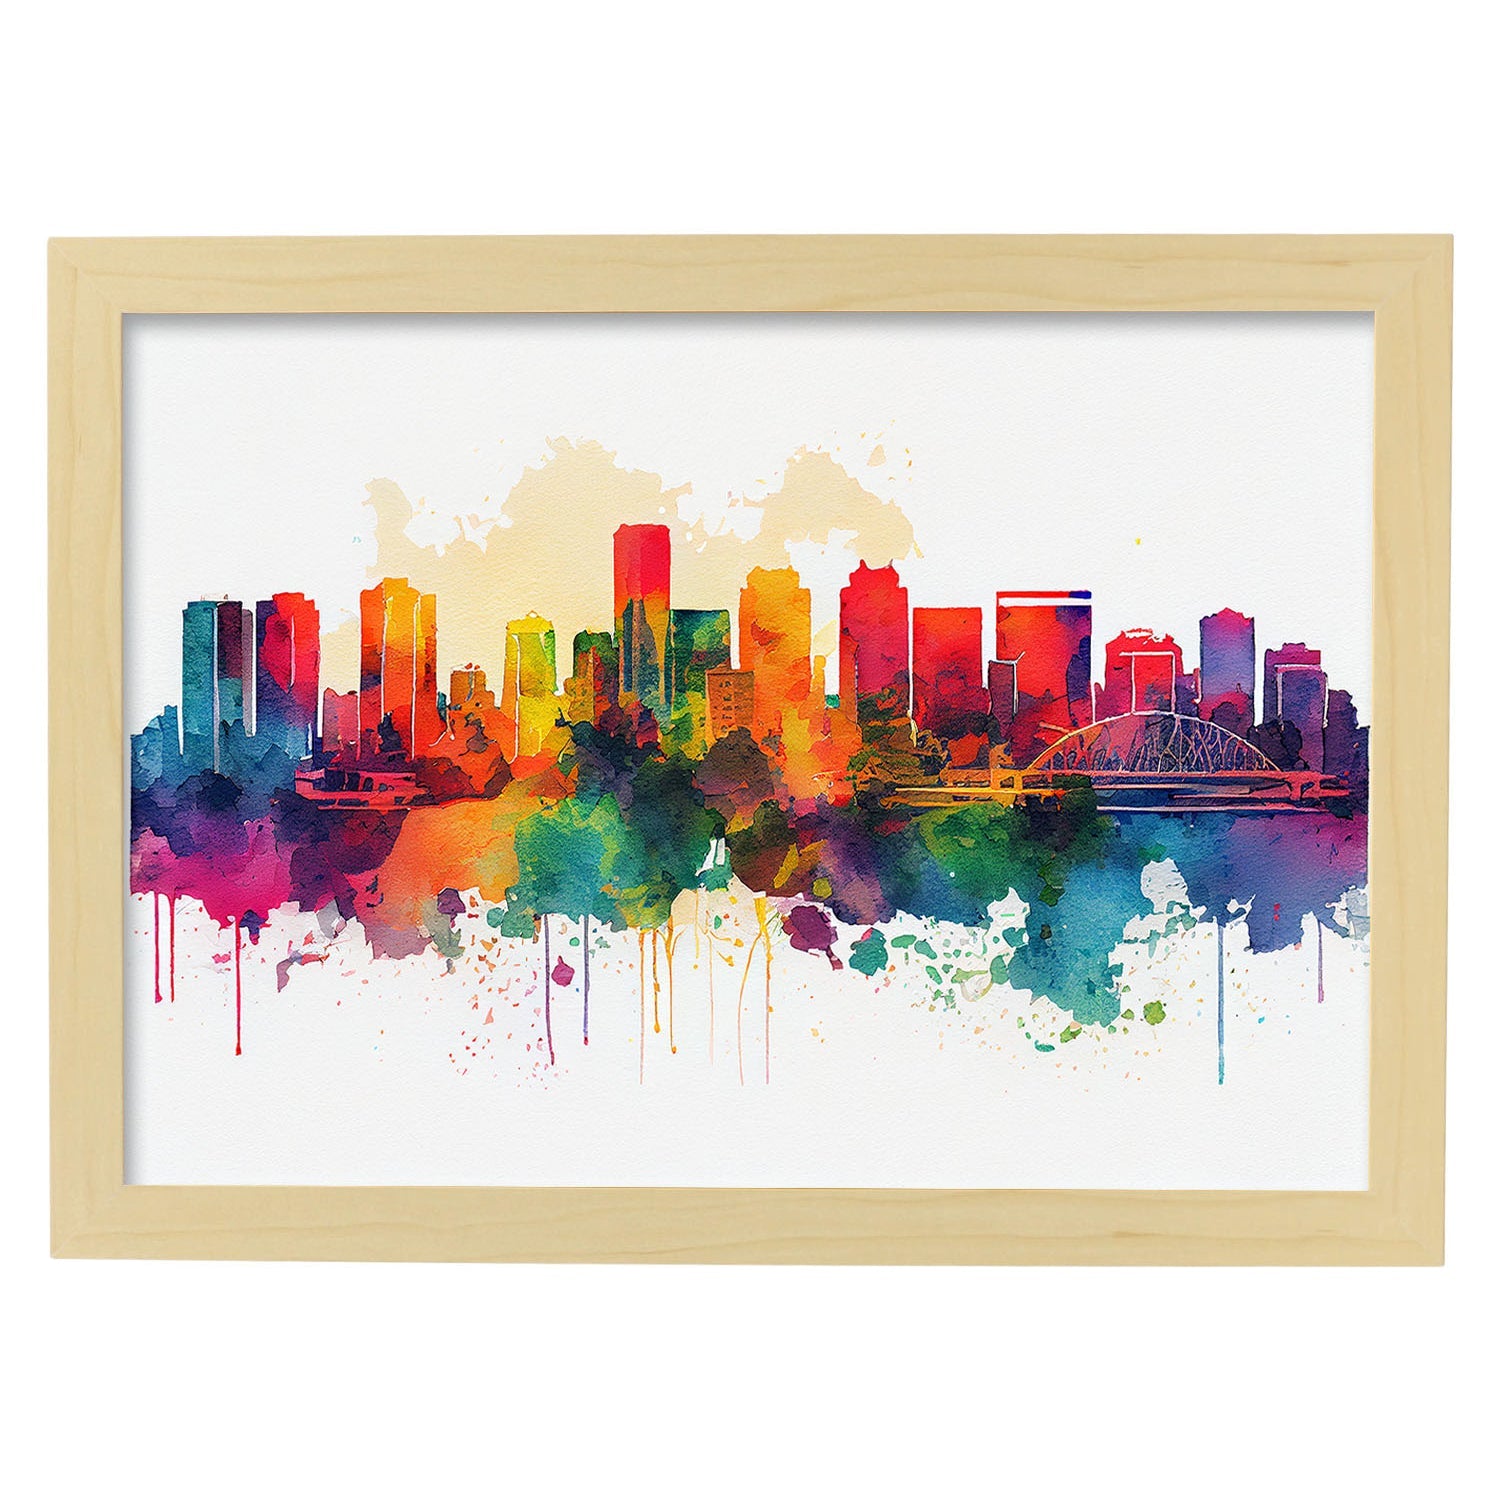 Nacnic watercolor of a skyline of the city of Honolulu. Aesthetic Wall Art Prints for Bedroom or Living Room Design.-Artwork-Nacnic-A4-Marco Madera Clara-Nacnic Estudio SL